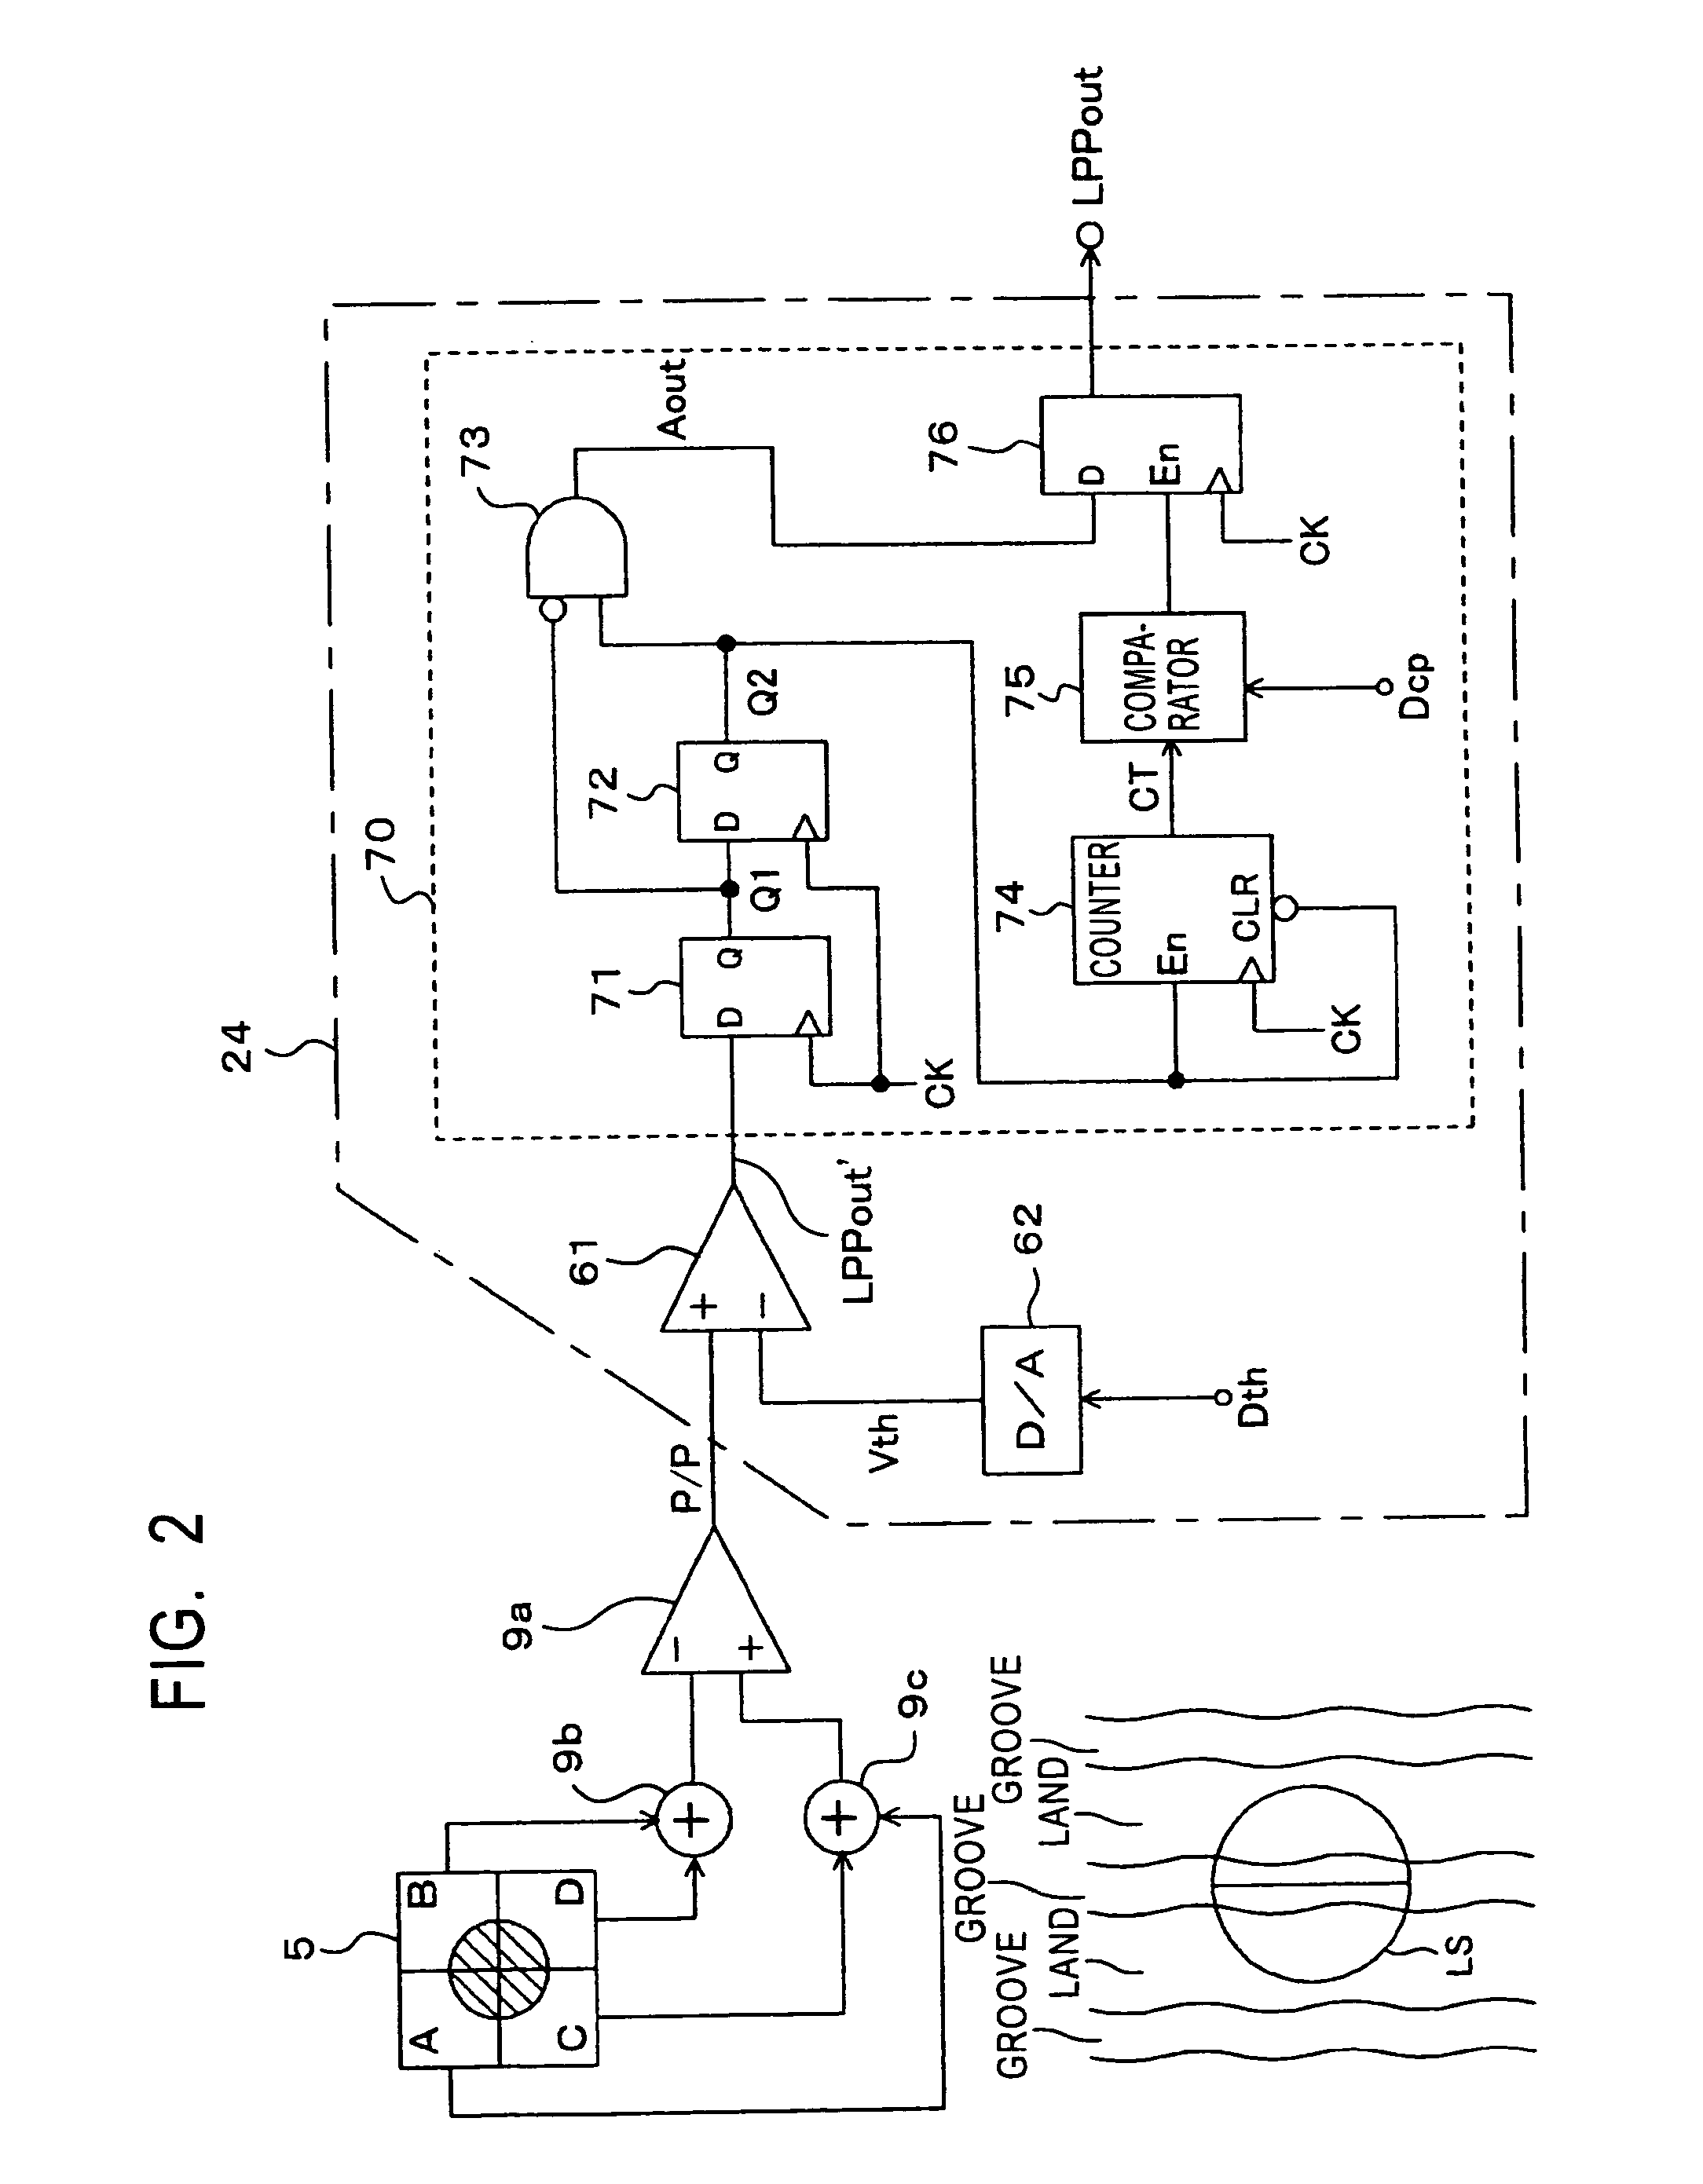 Disk drive and detection method using pre-pit detection and push-pull signal generation